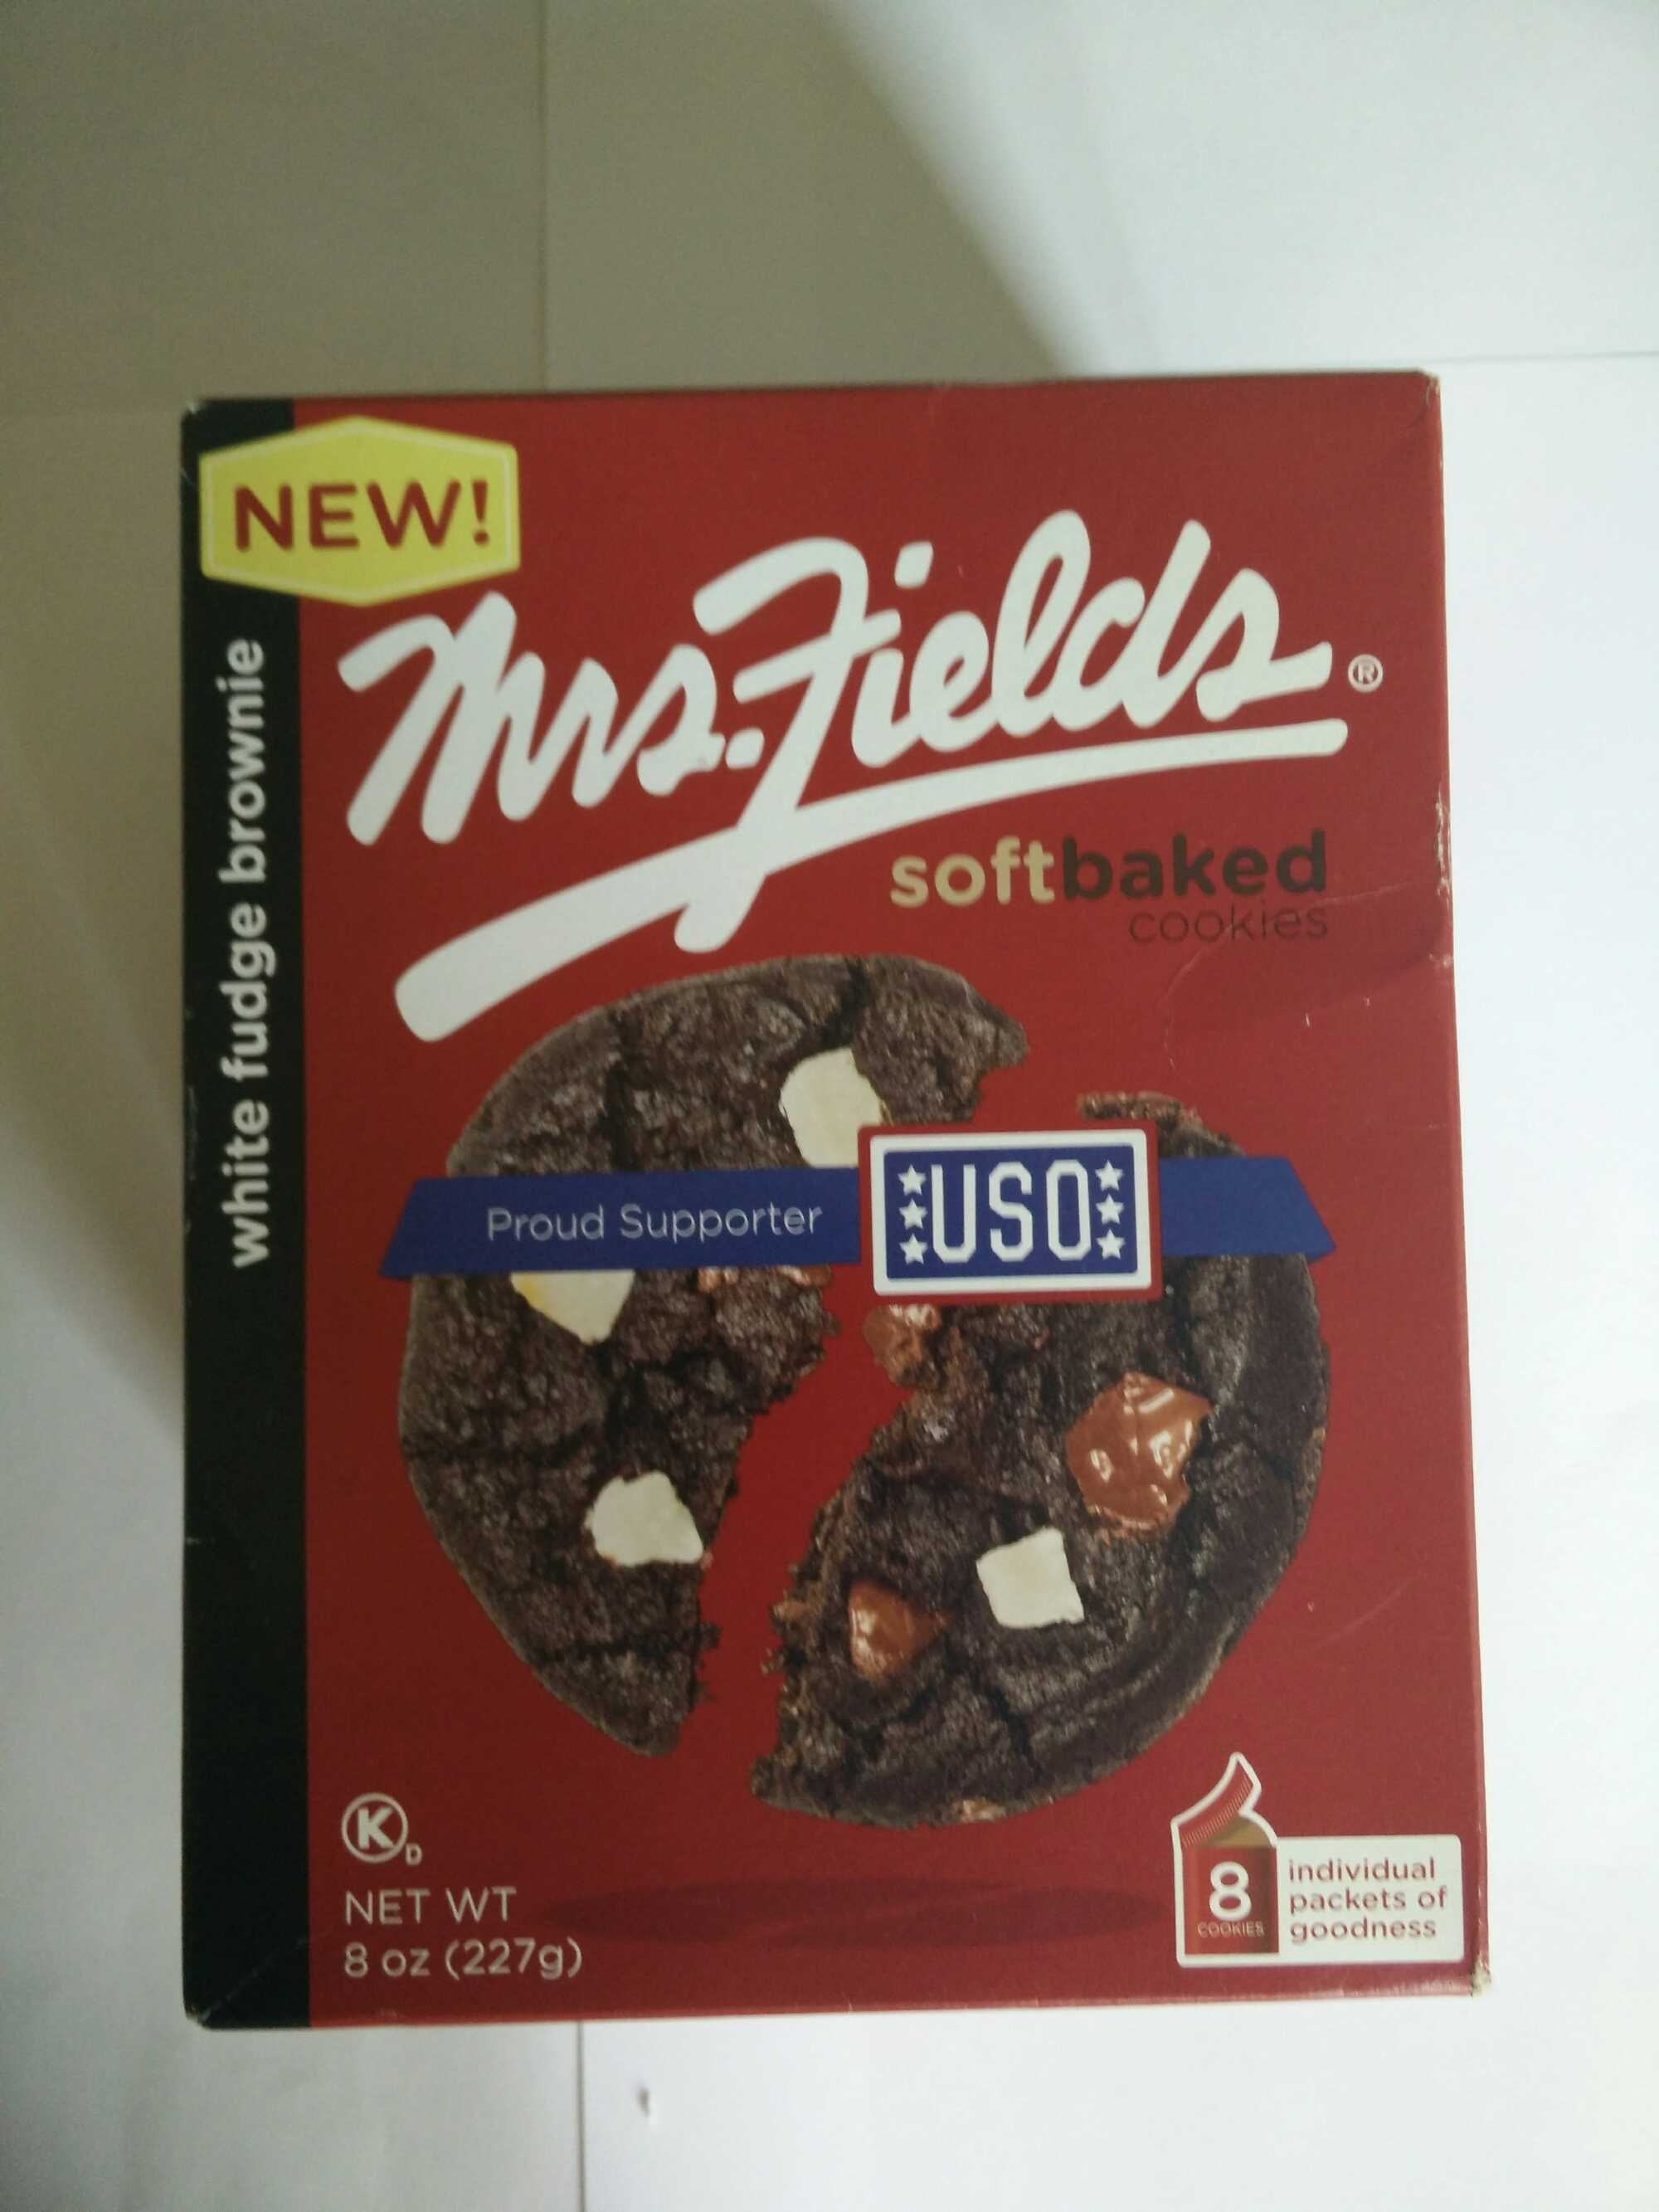 Mrs. fields, soft baked cookies, white fudge brownie - Product